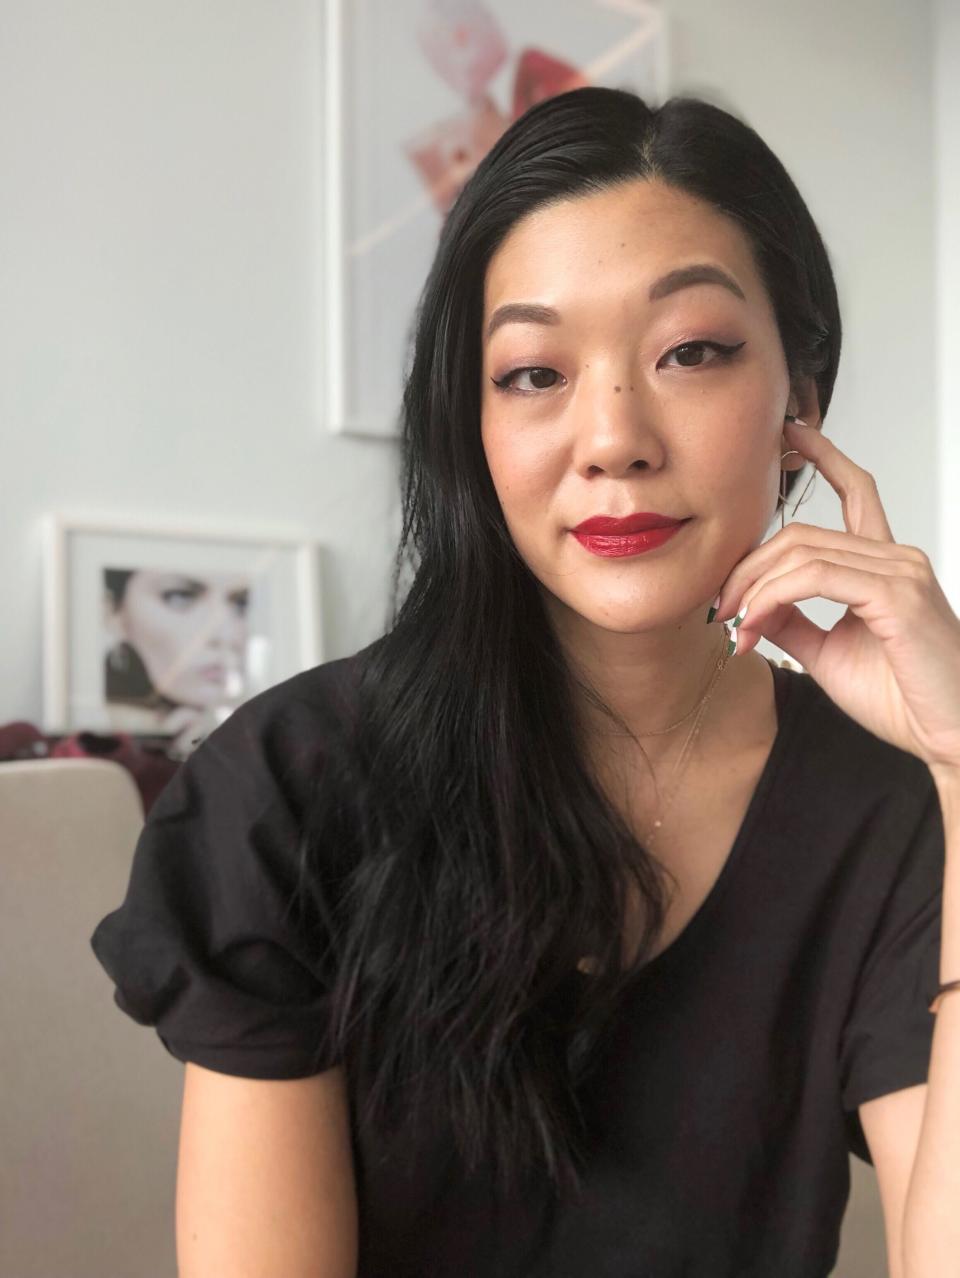 Allure editor in chief, Michelle Lee, wears Broadway, a cool, blue-based cherry. "It's a great red for the fall/winter months."